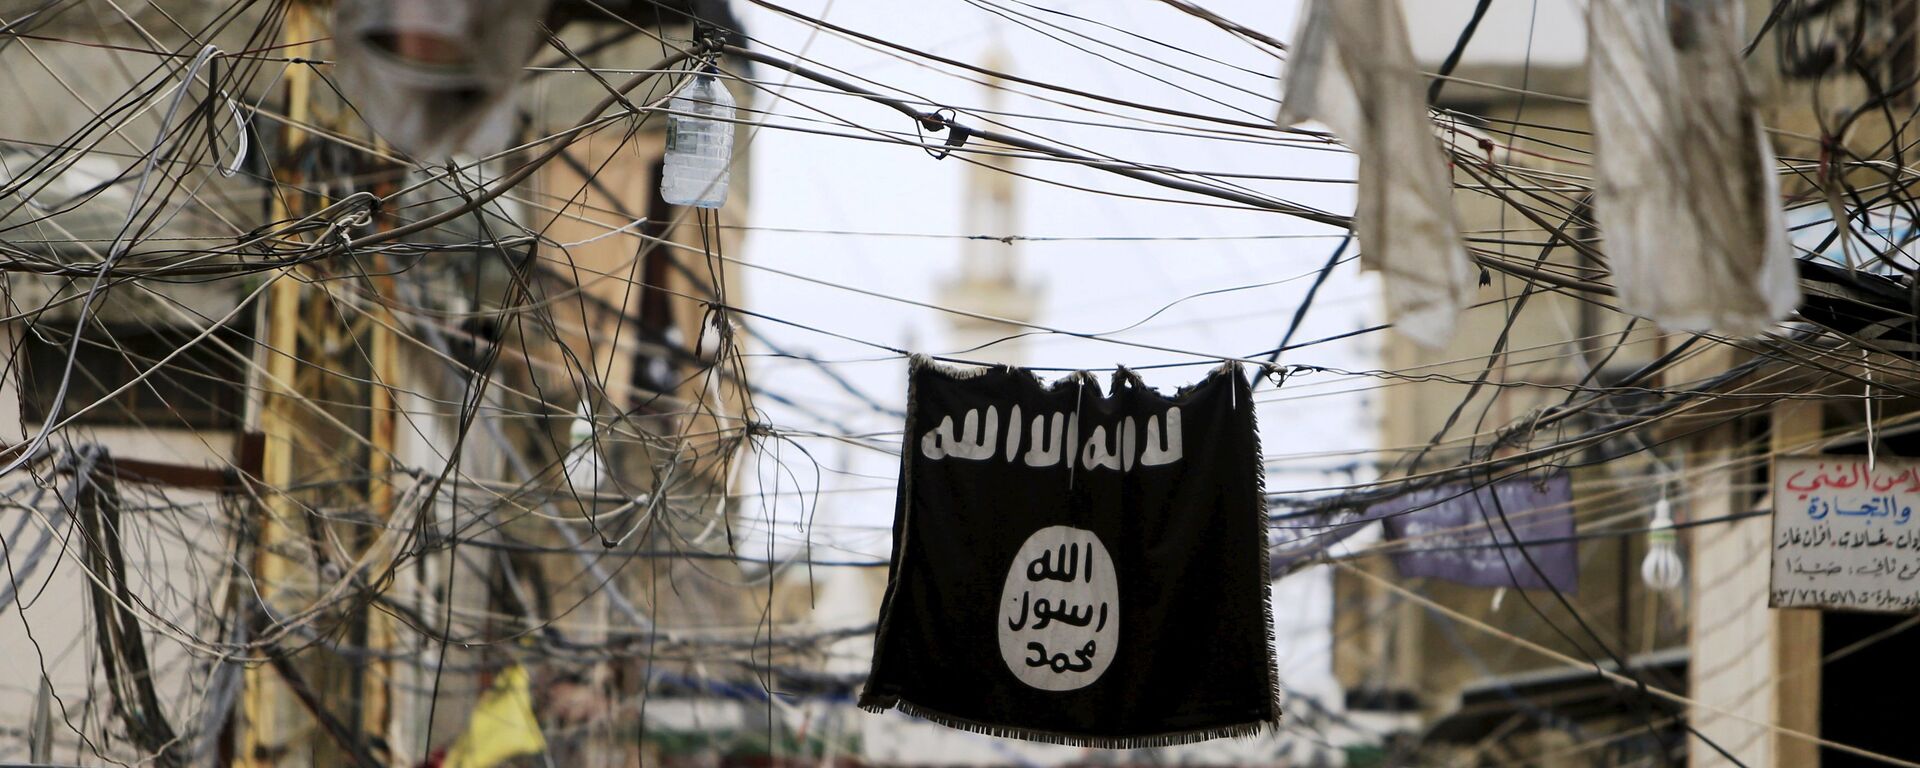 An Islamic State flag hangs amid electric wires over a street. - Sputnik International, 1920, 06.09.2021